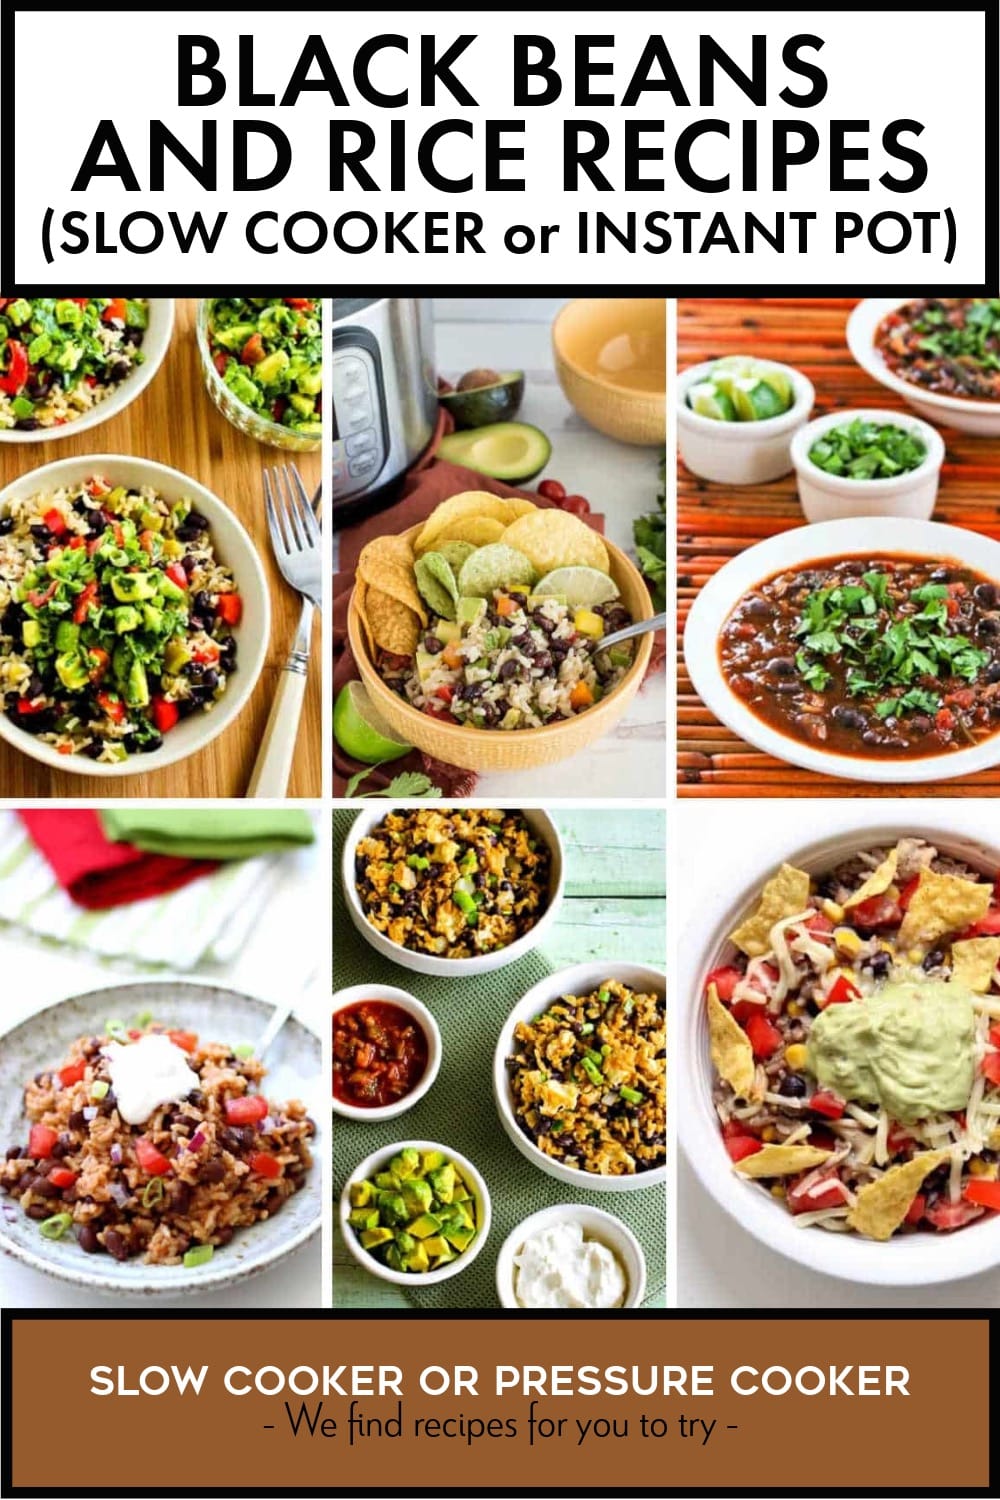 Pinterest image of Black Beans and Rice Recipes (Slow Cooker or Instant Pot)